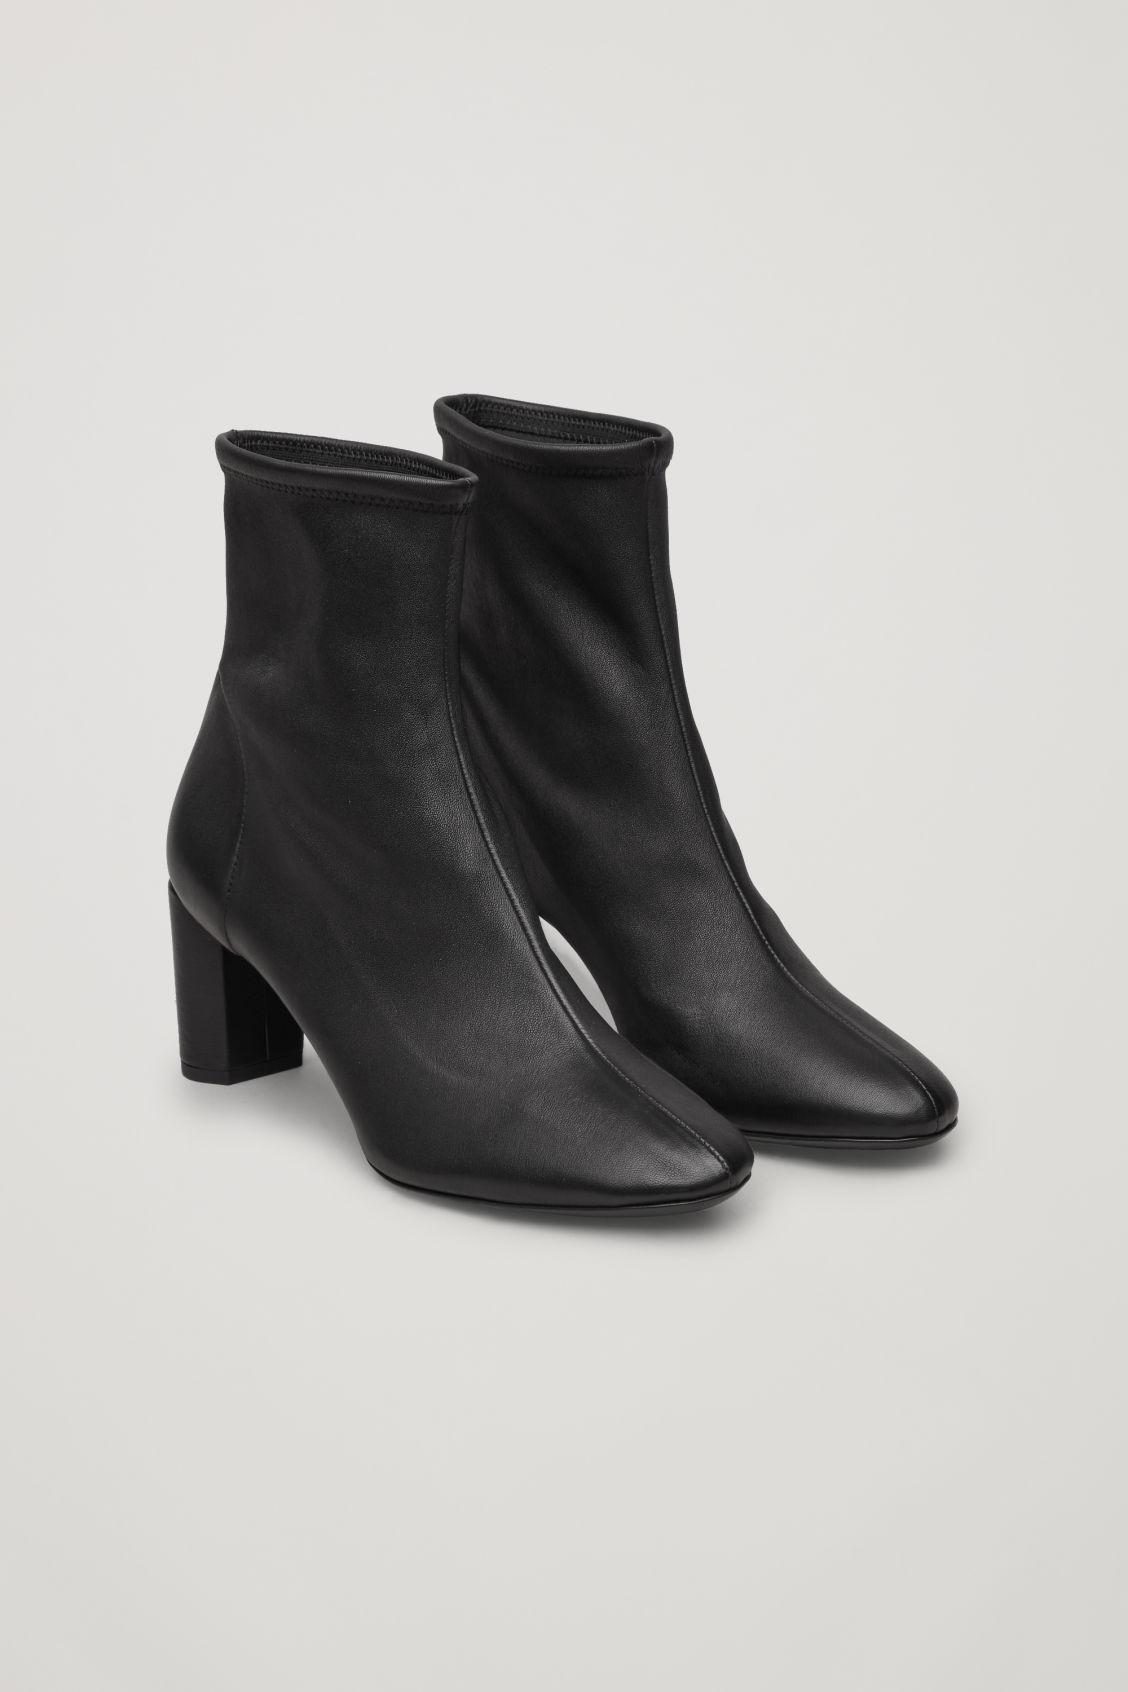 COS Stretch-leather Ankle Boots in Black | Lyst